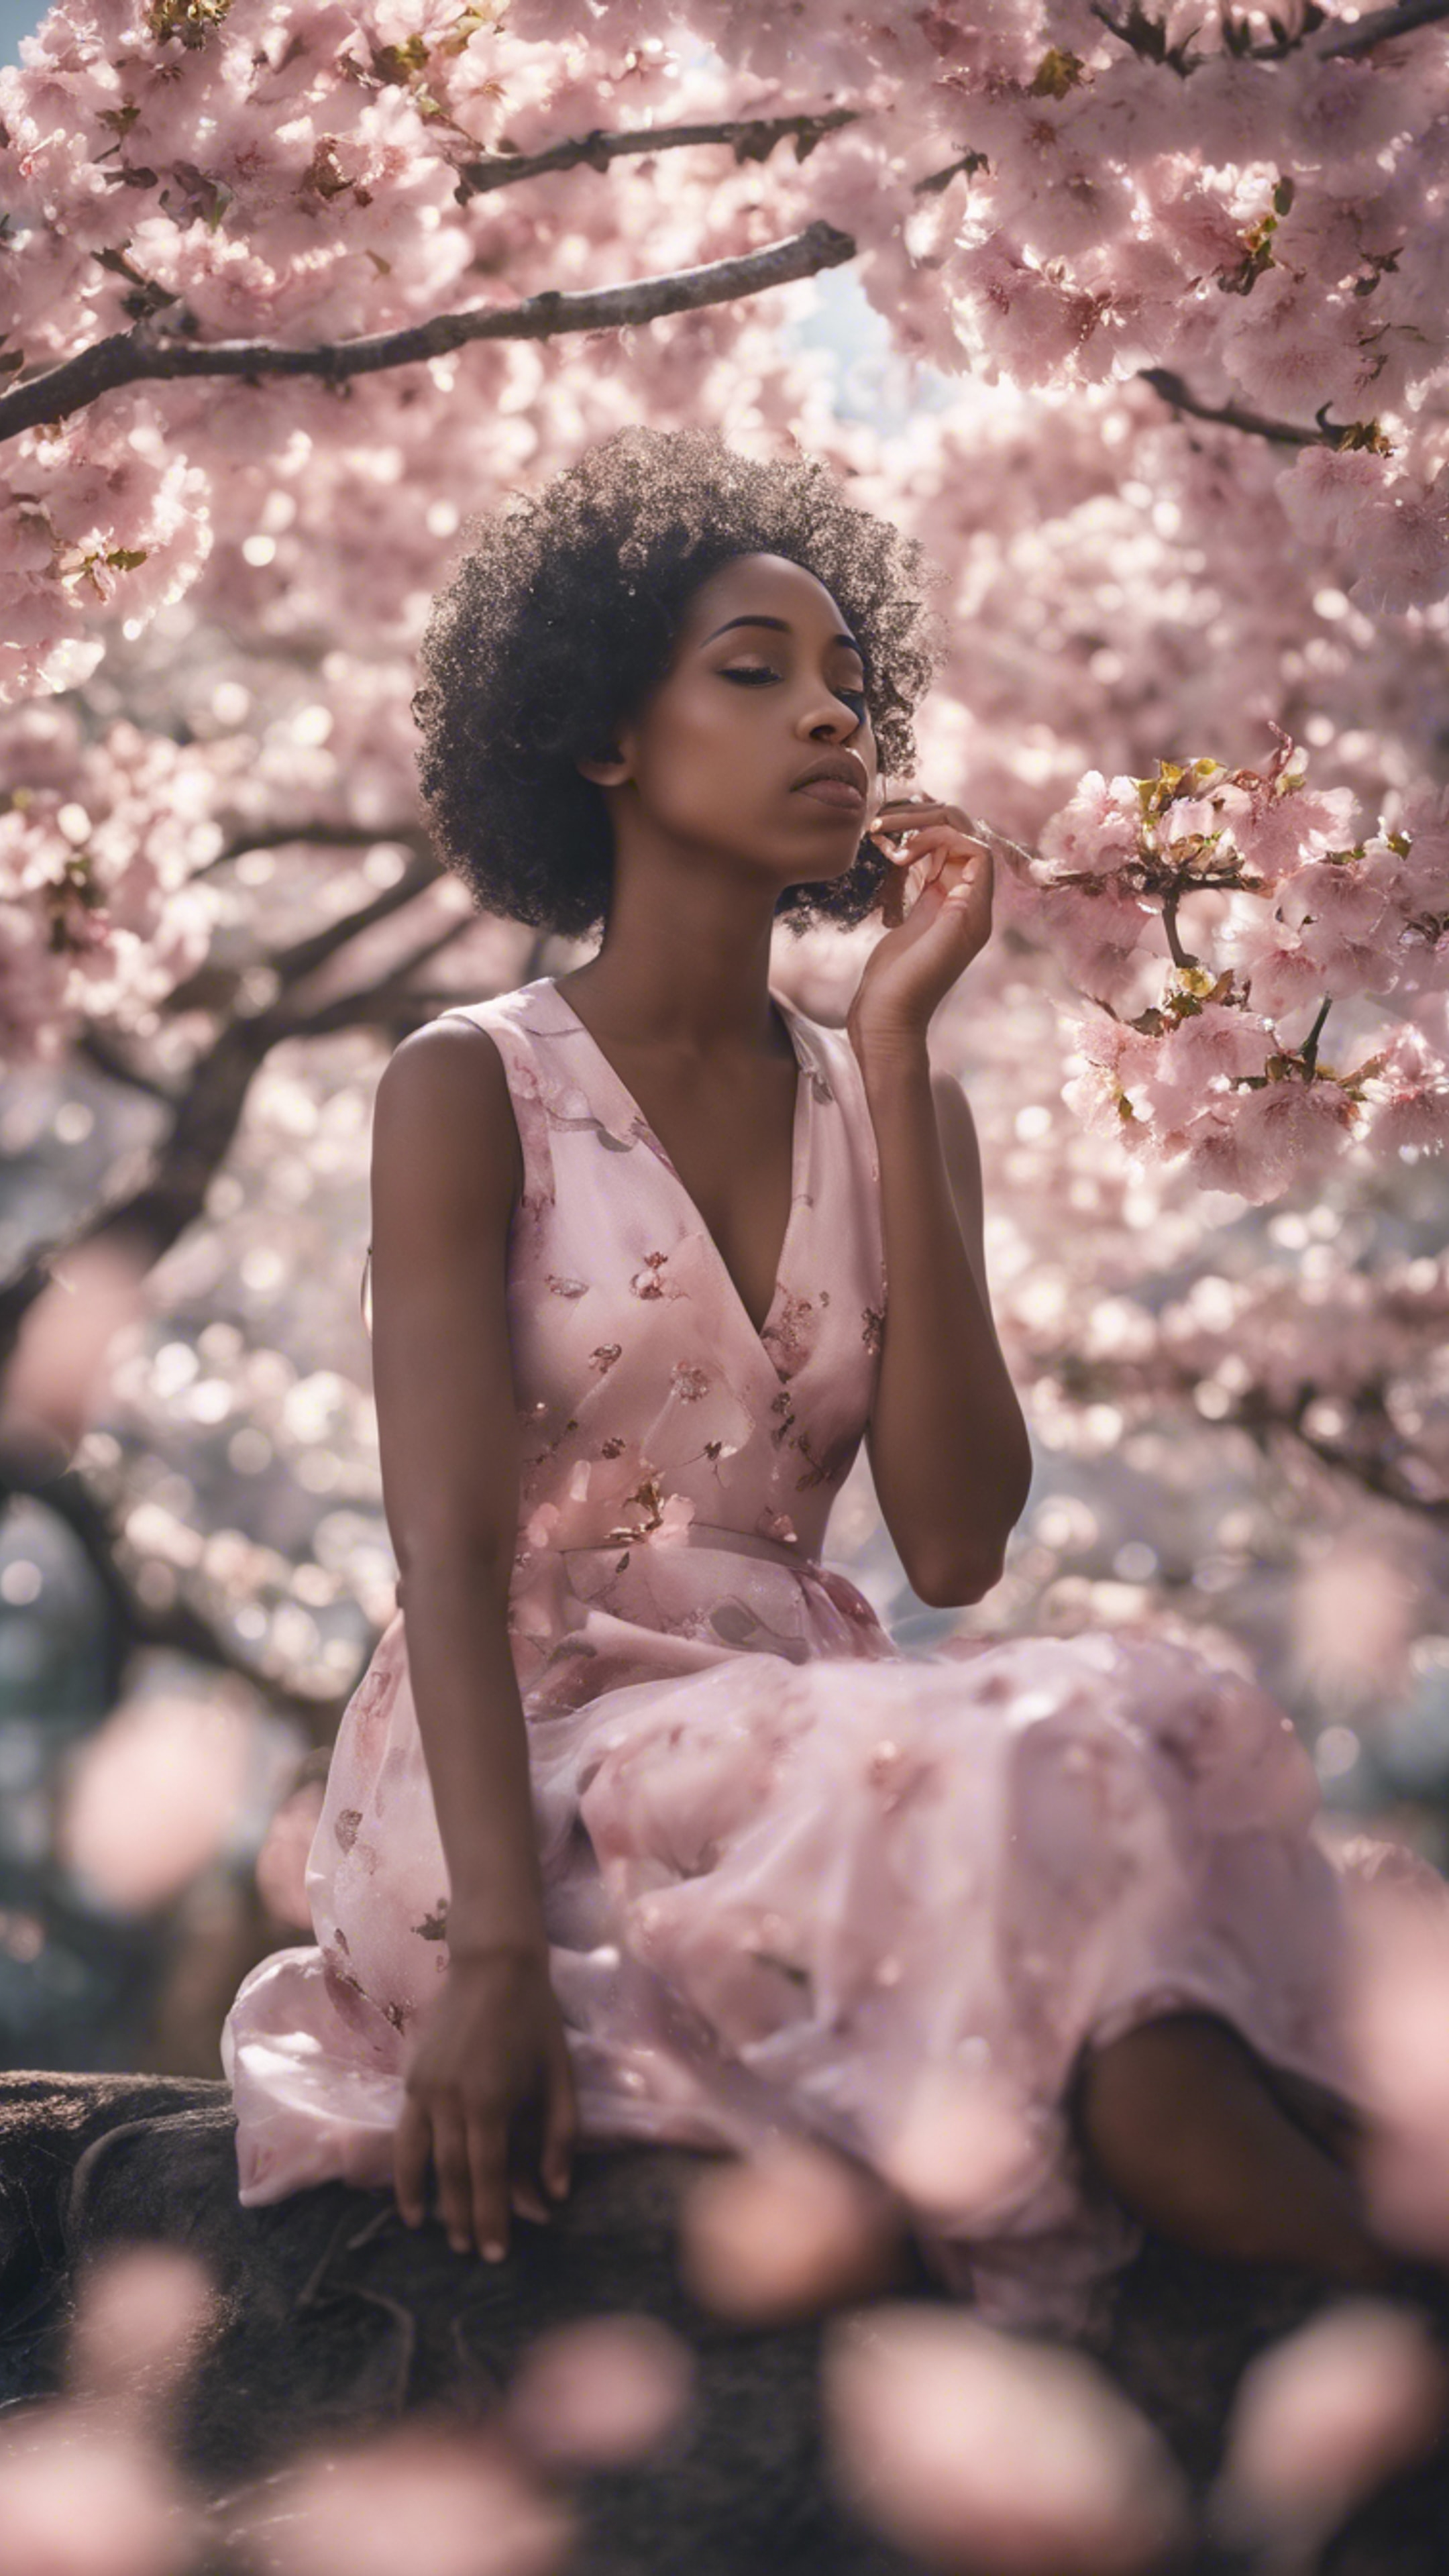 A dreamy black girl sitting beneath a cherry blossom tree, her thoughts refracted in the shimmers of petal-littered water. Ταπετσαρία[524c00be89b441109aac]